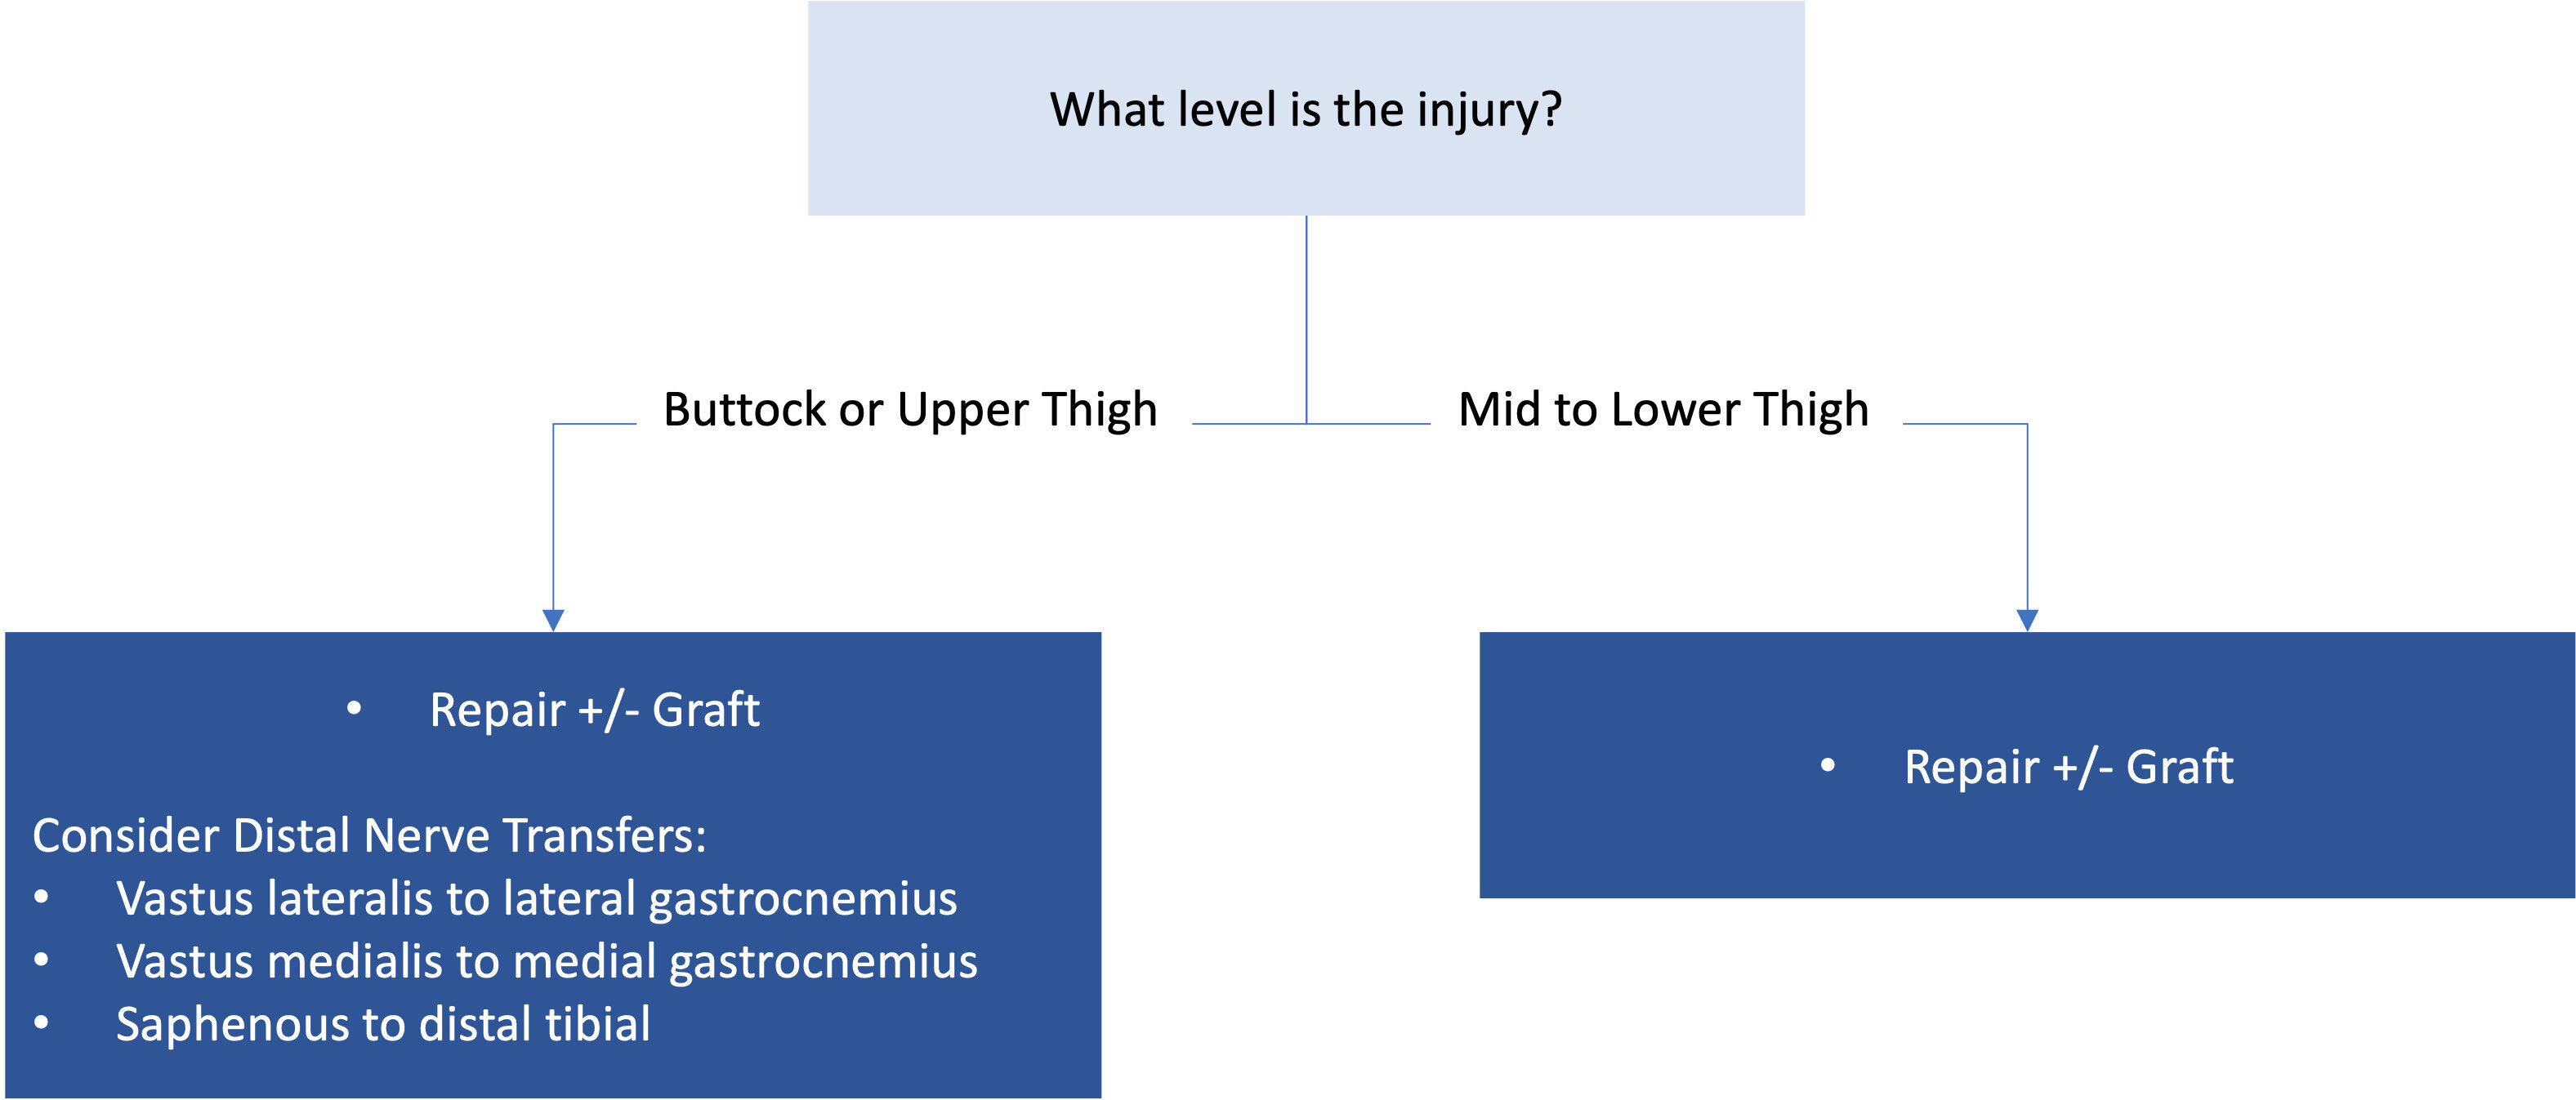 Functional reconstruction of lower extremity nerve injuries